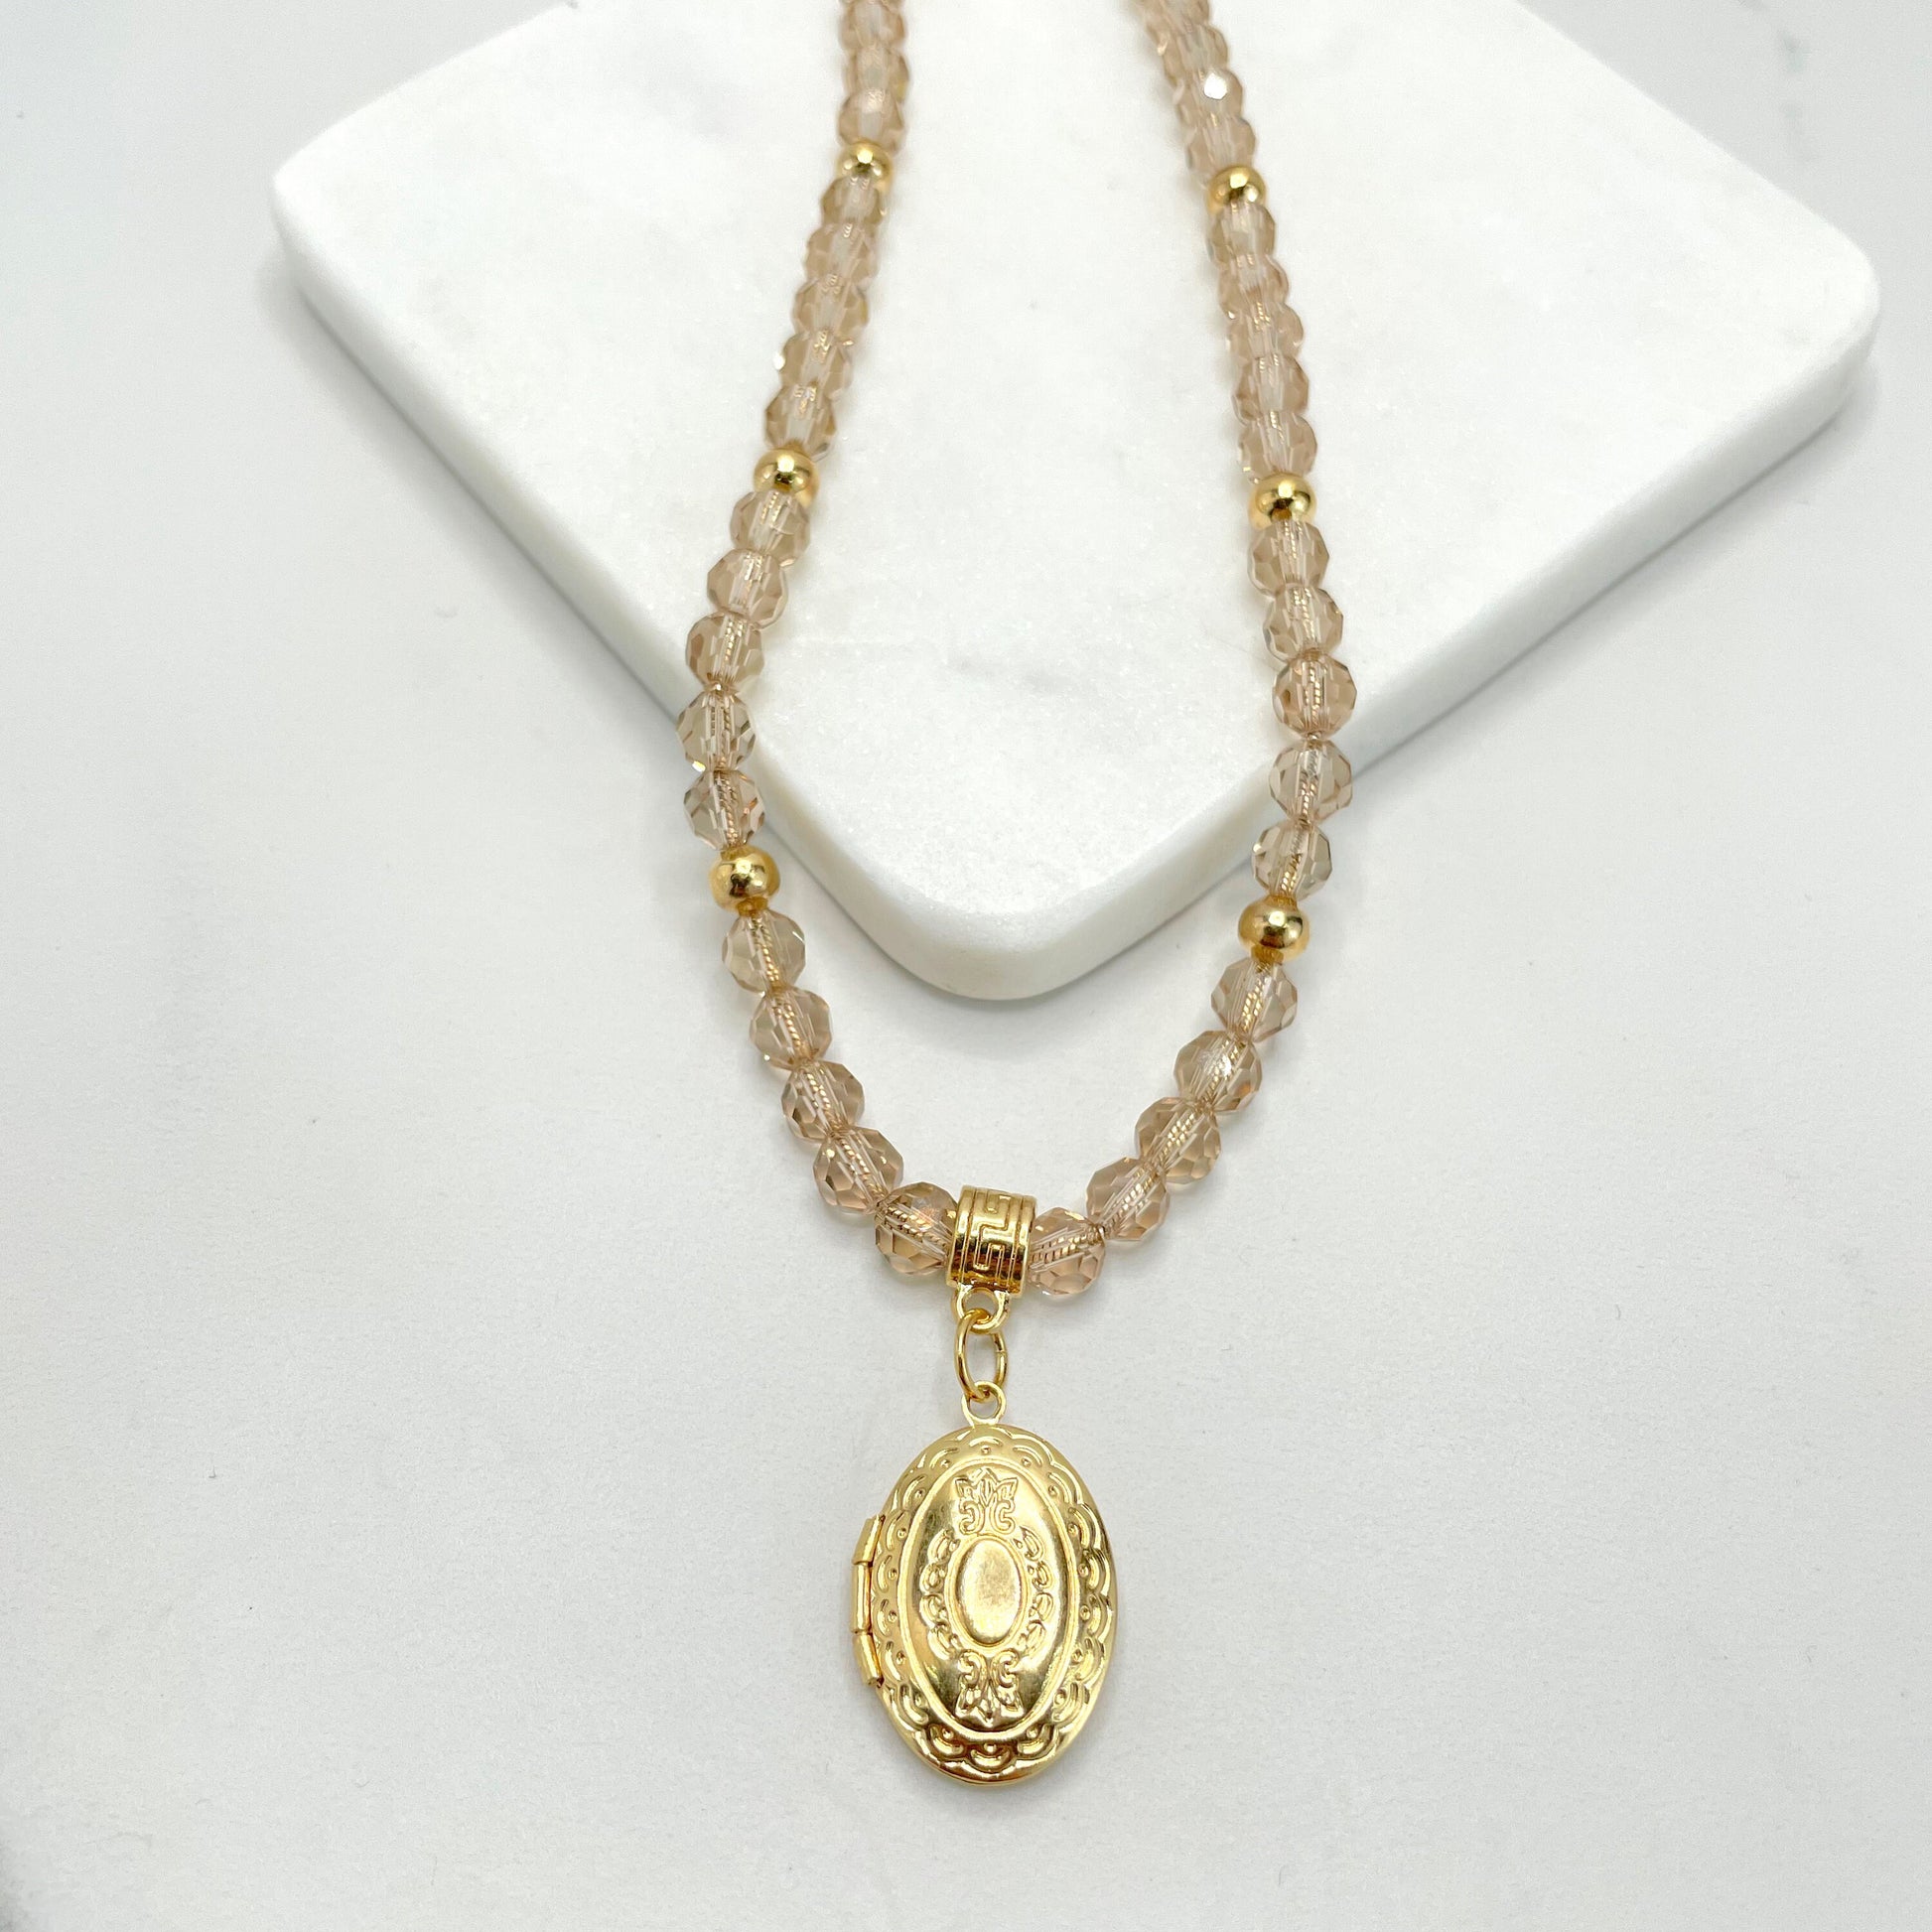 18k Gold Filled 1.4mm Spiral Chain and Clear Beige Beads Necklace with Vintage Photo Locket Pendant, Wholesale Jewelry Making Supplies